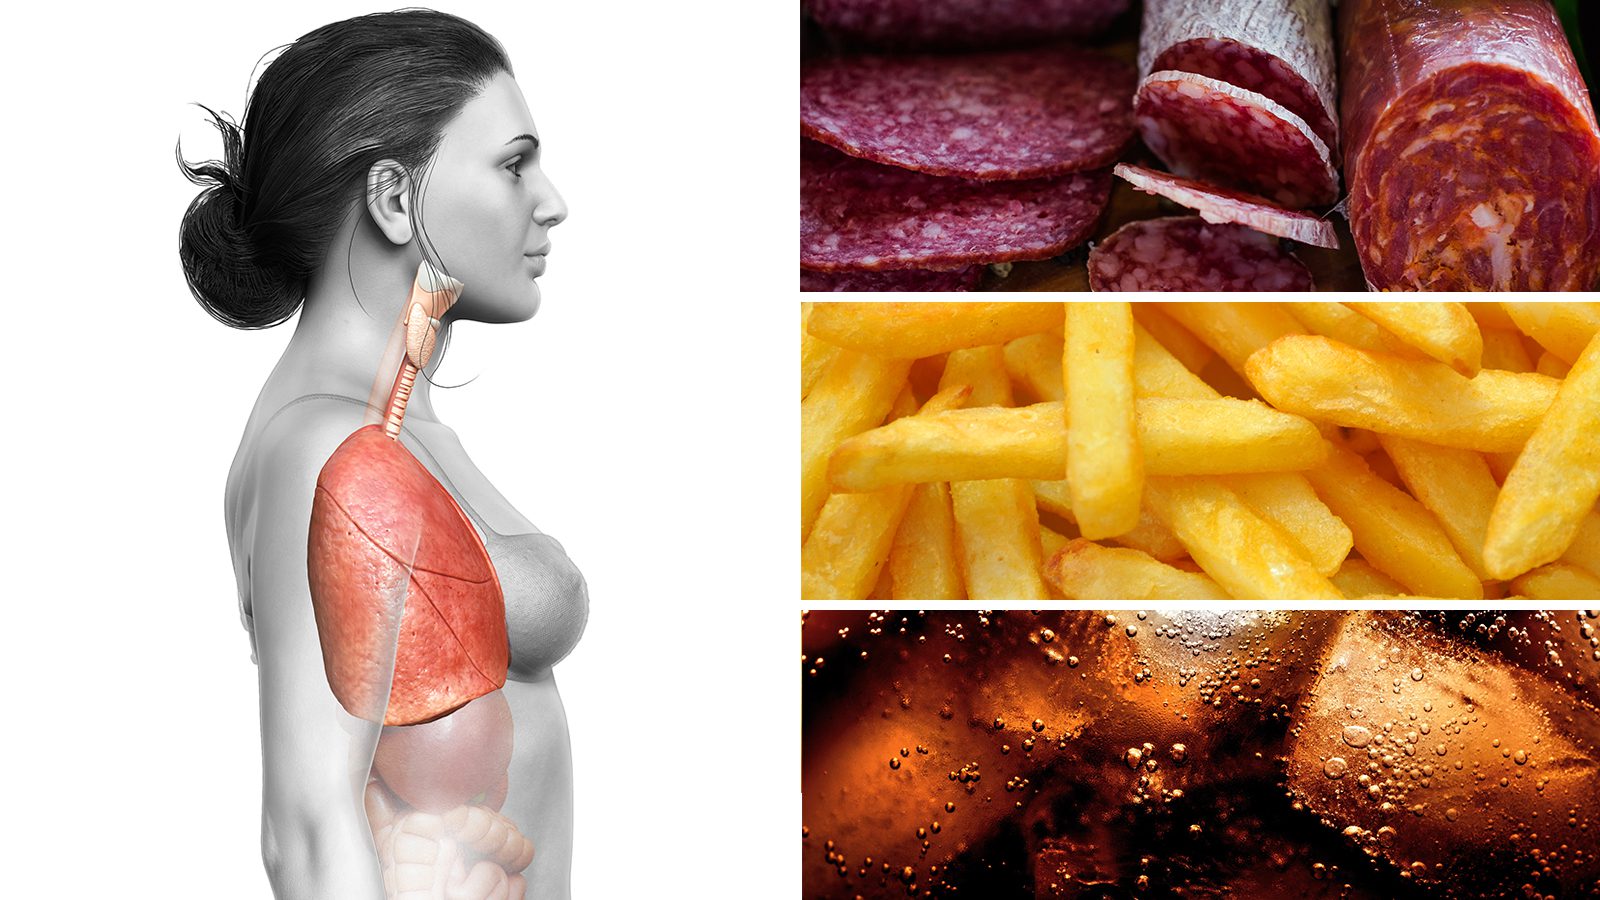 Doctors Explain 7 Foods That Are Bad for Lung Health